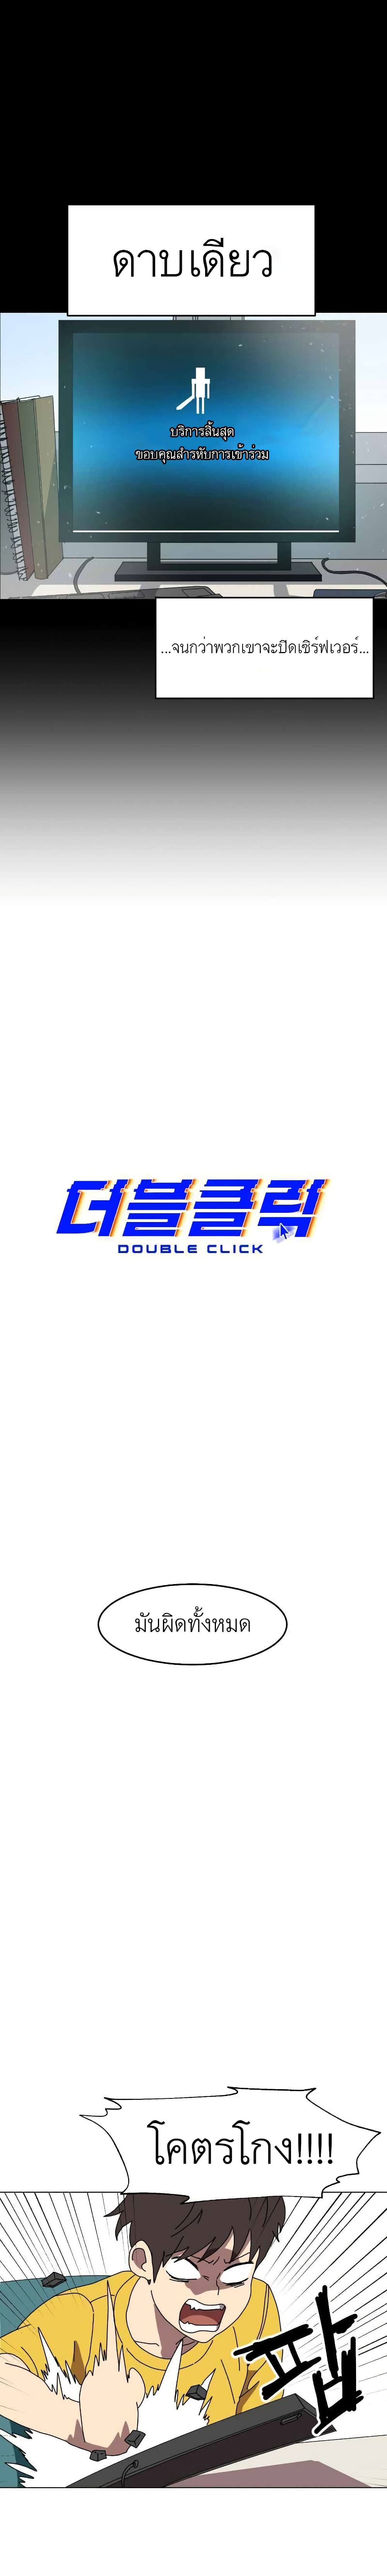 Double Click 2 02